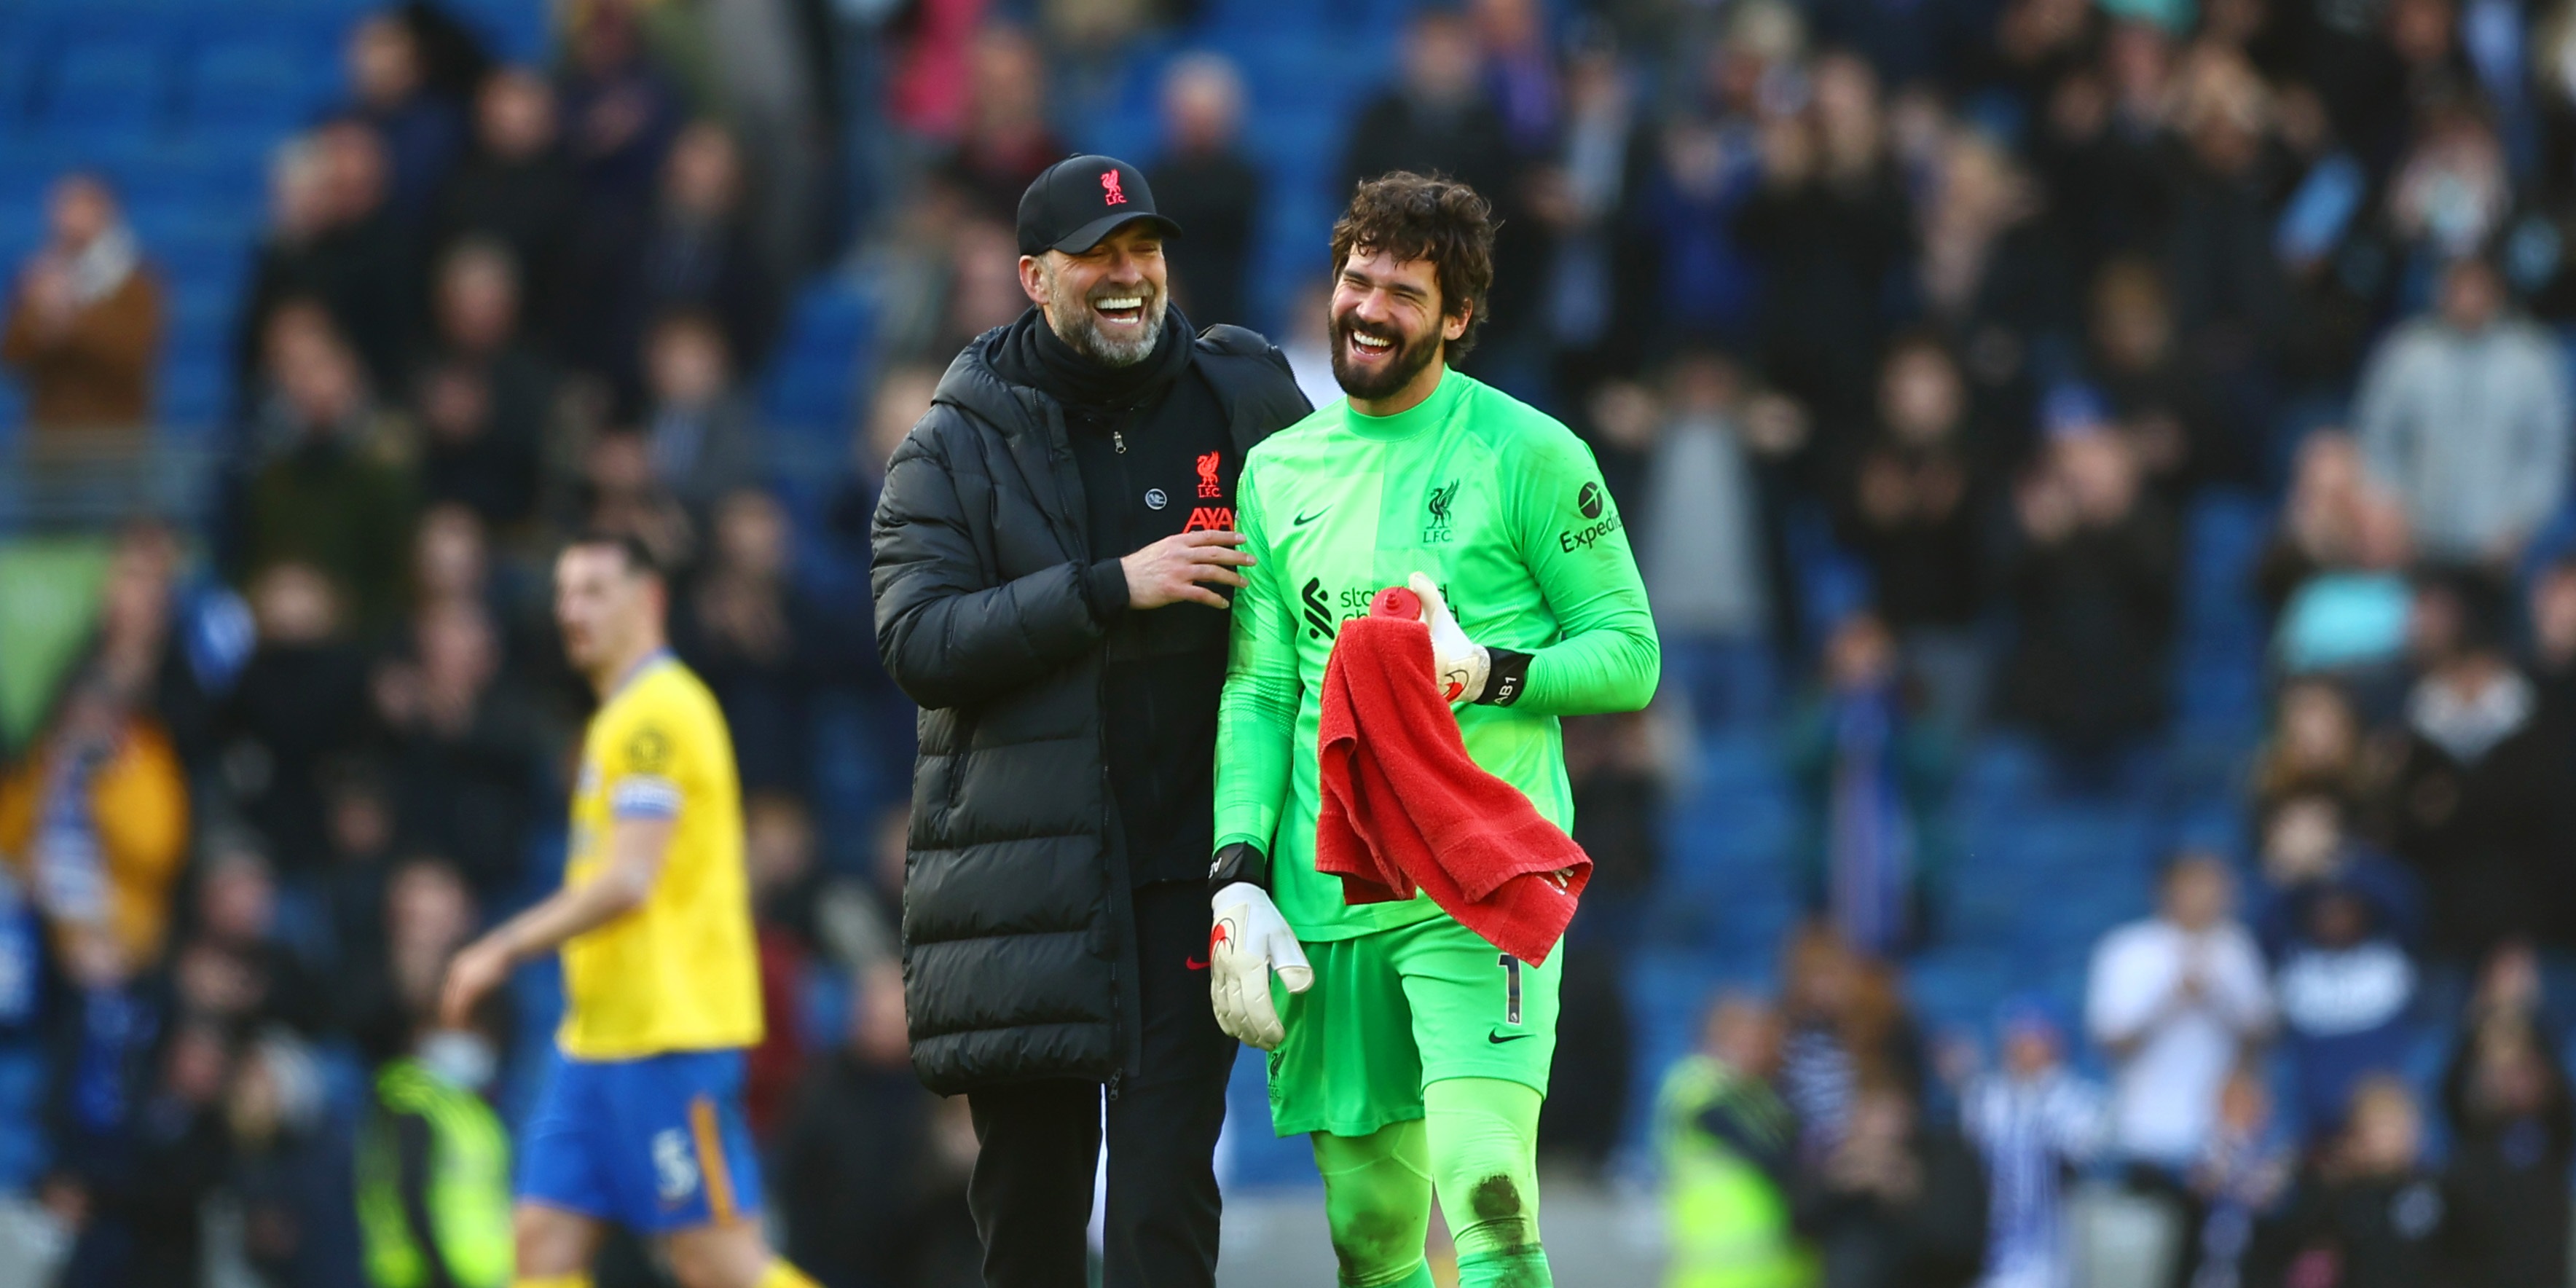 ‘He saves things he shouldn’t’ – Ex-Red stresses the importance of Alisson Becker to Jurgen Klopp’s Liverpool side